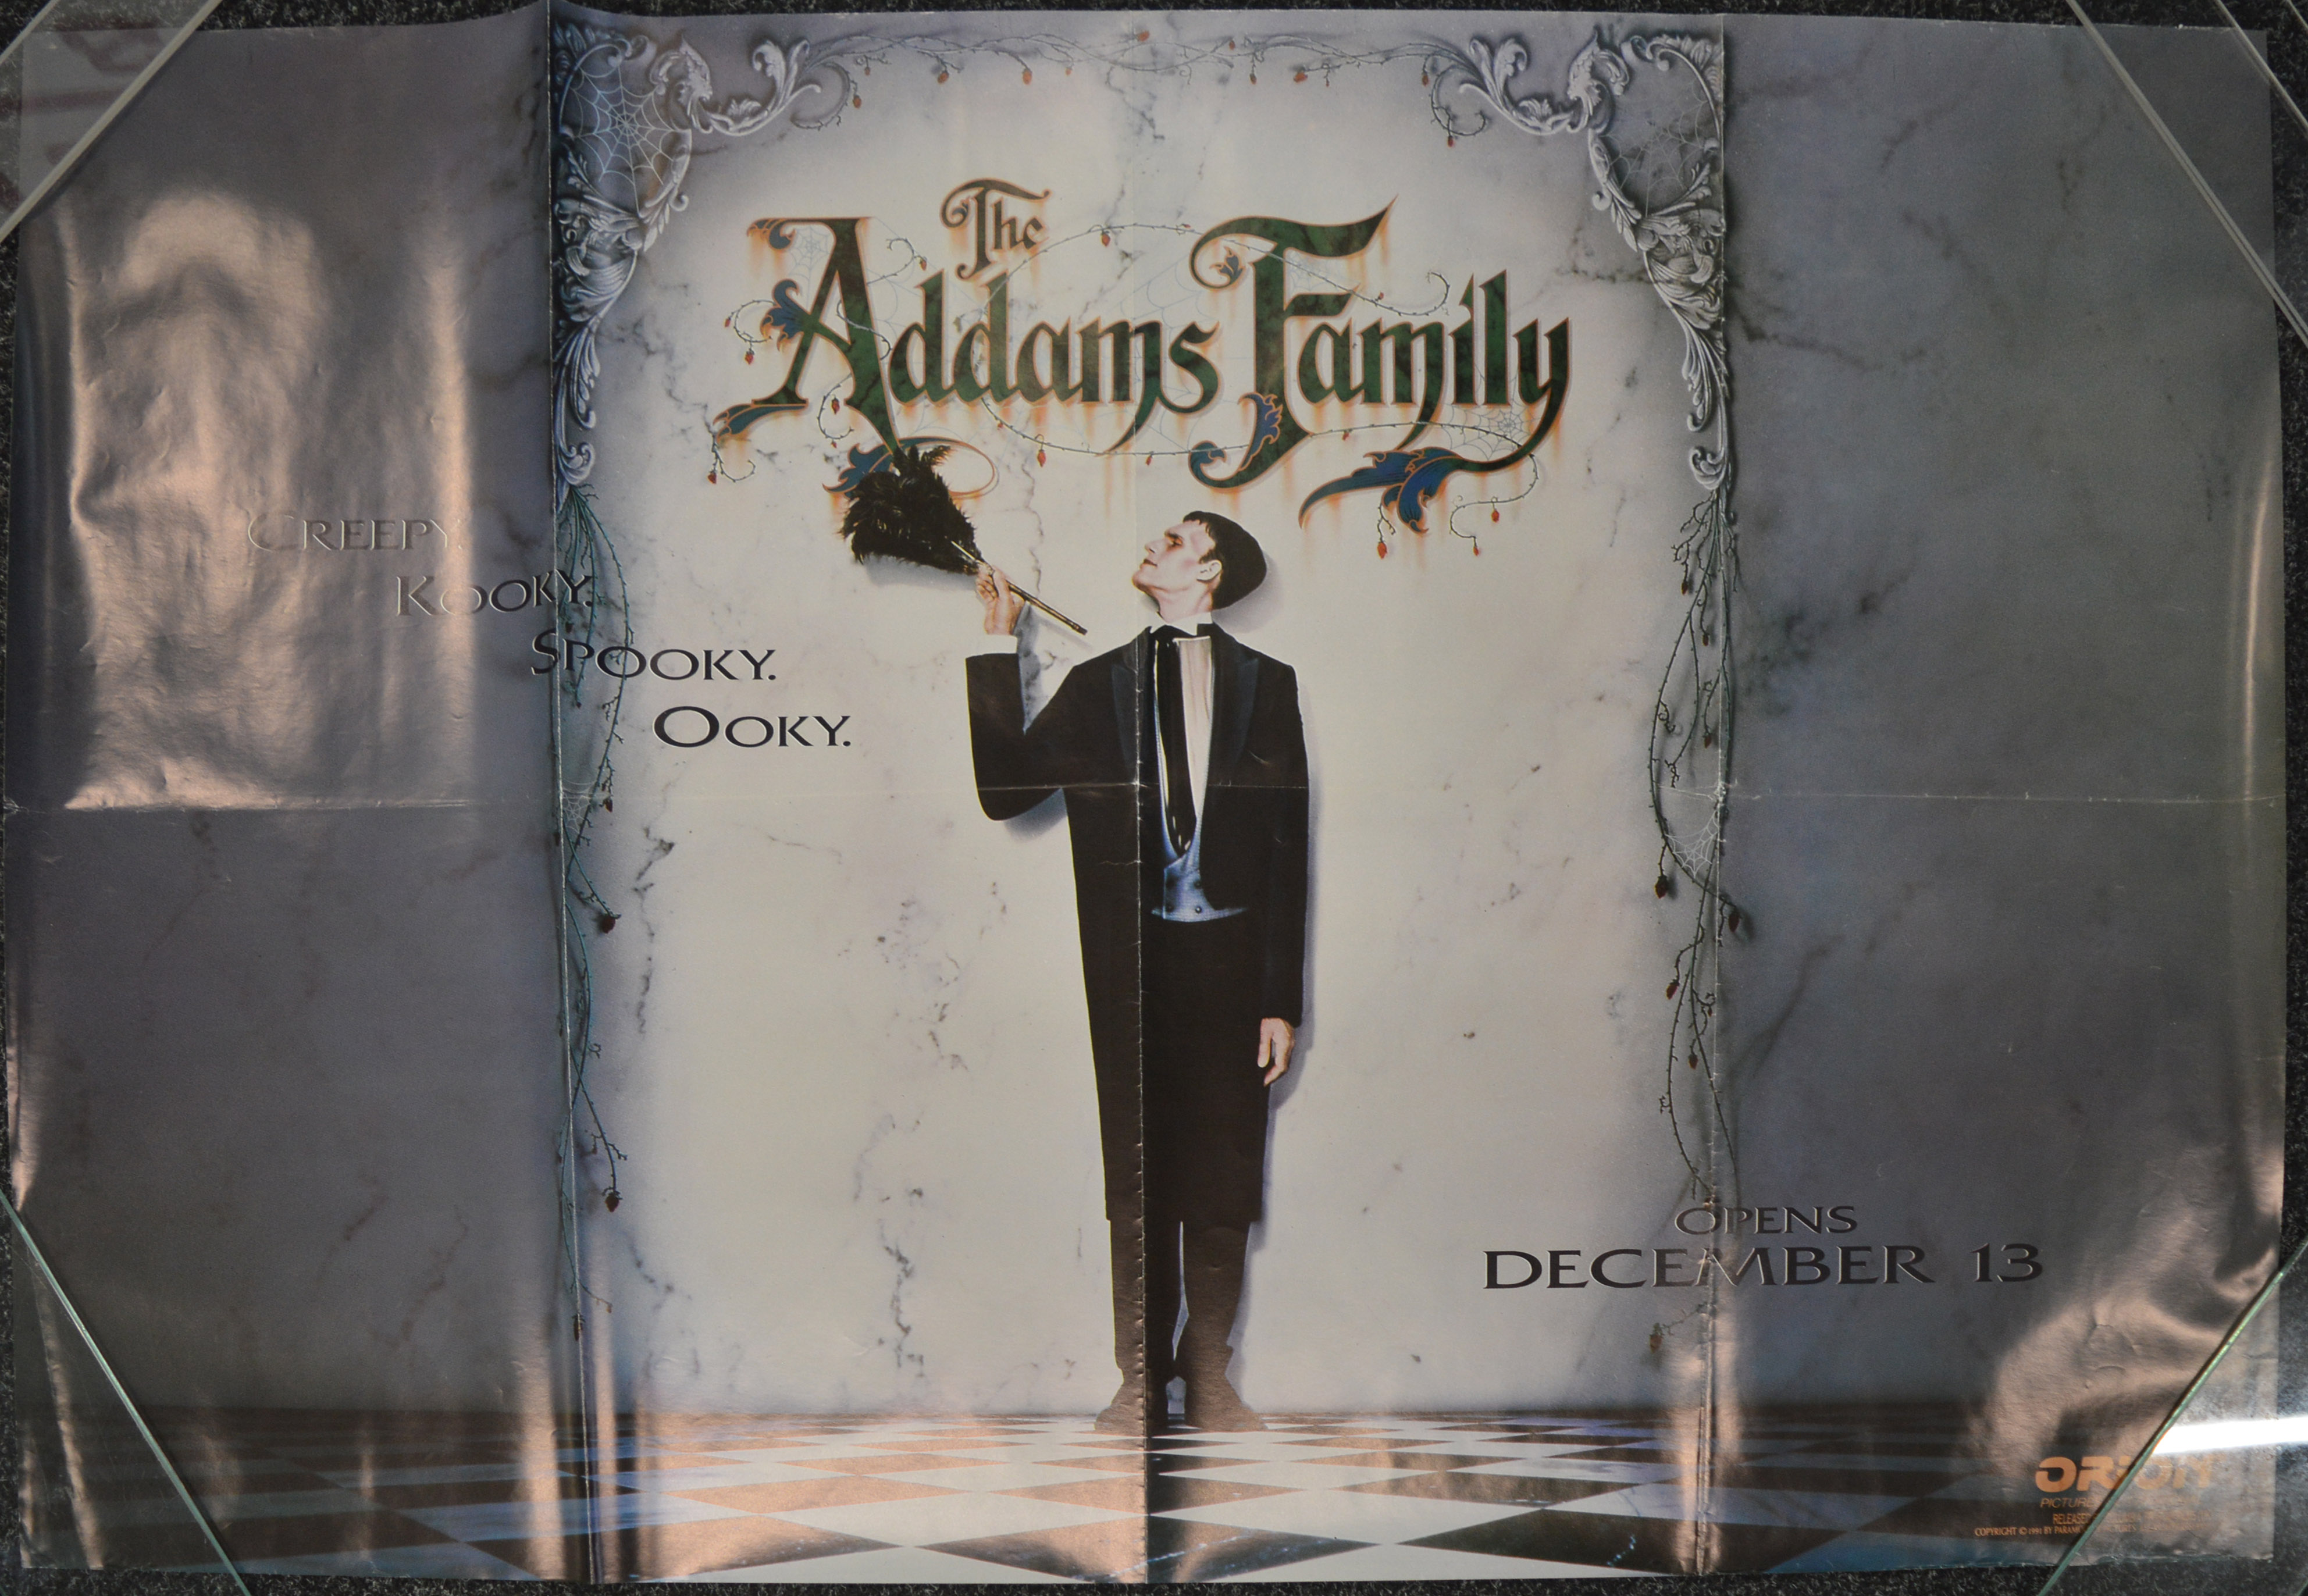 Collection of approx 60 UK Quad film posters titles include The Addams Family, Domino st Kiera